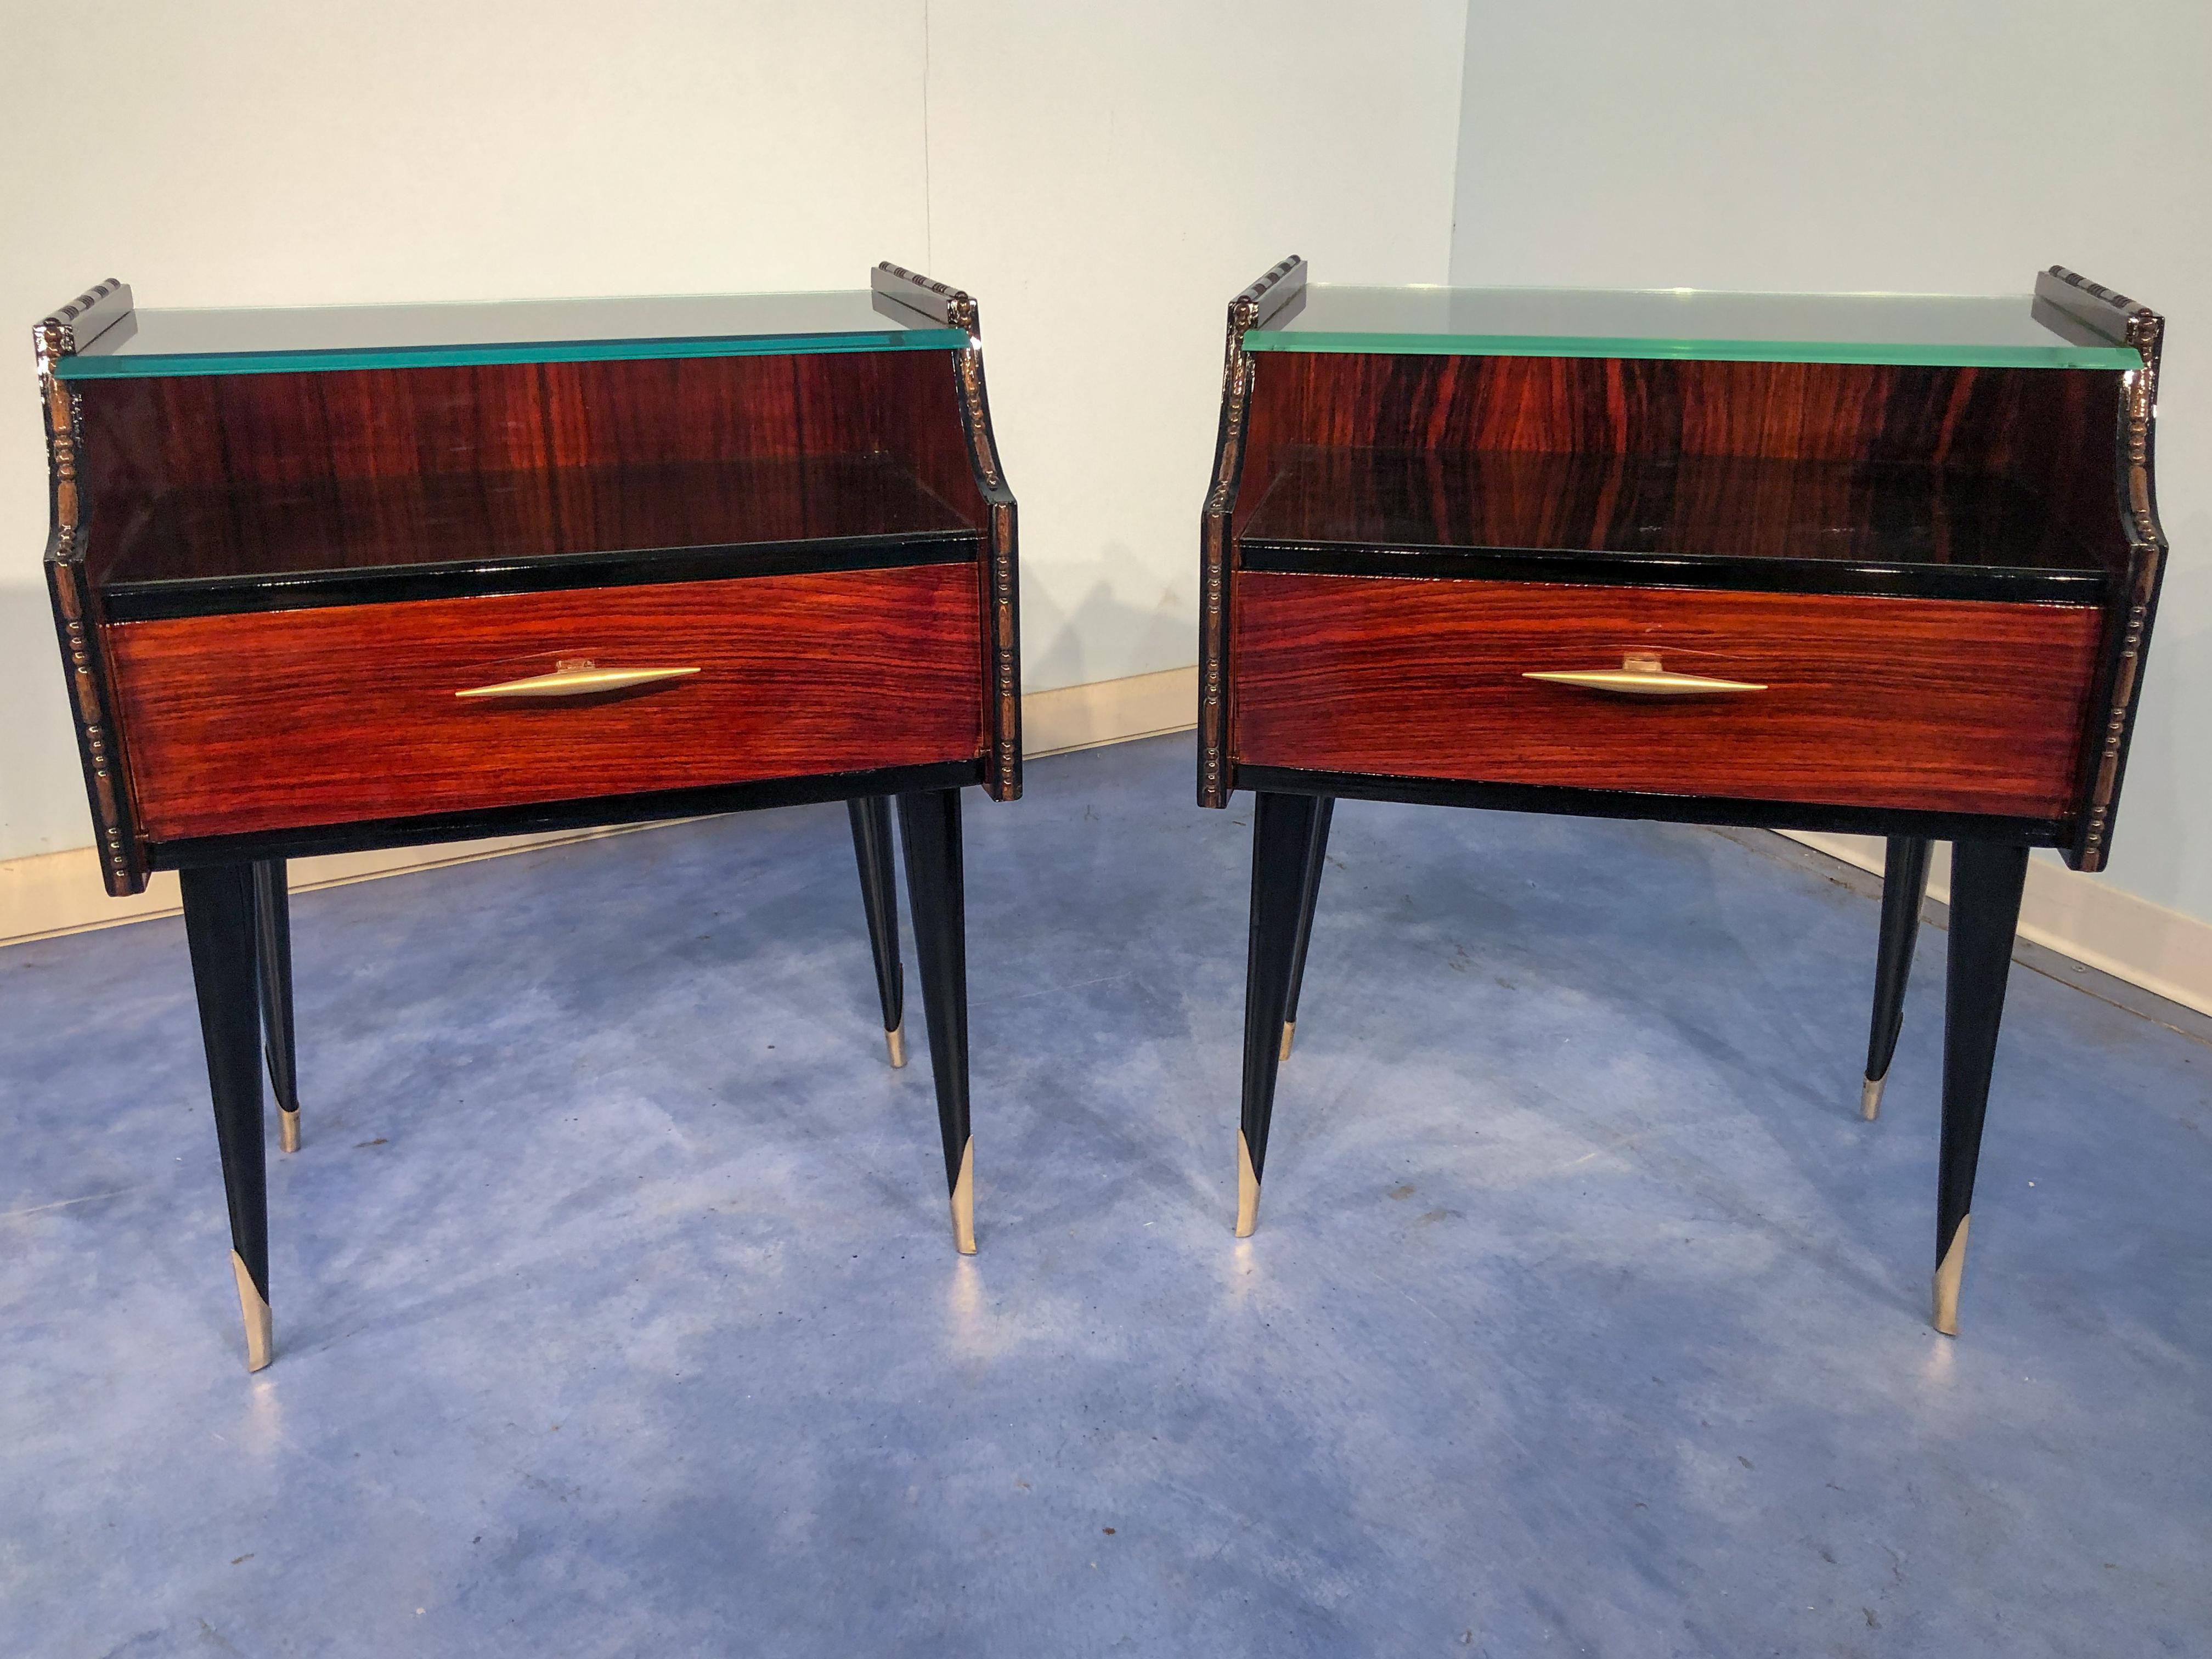 Elegant and stylish Italian midcentury teak nightstands or side tables 1960, with double glass, one transparent, slightly green, on the top, and black lacquered the second one. You can see the refined details such as the stylish brass handles or